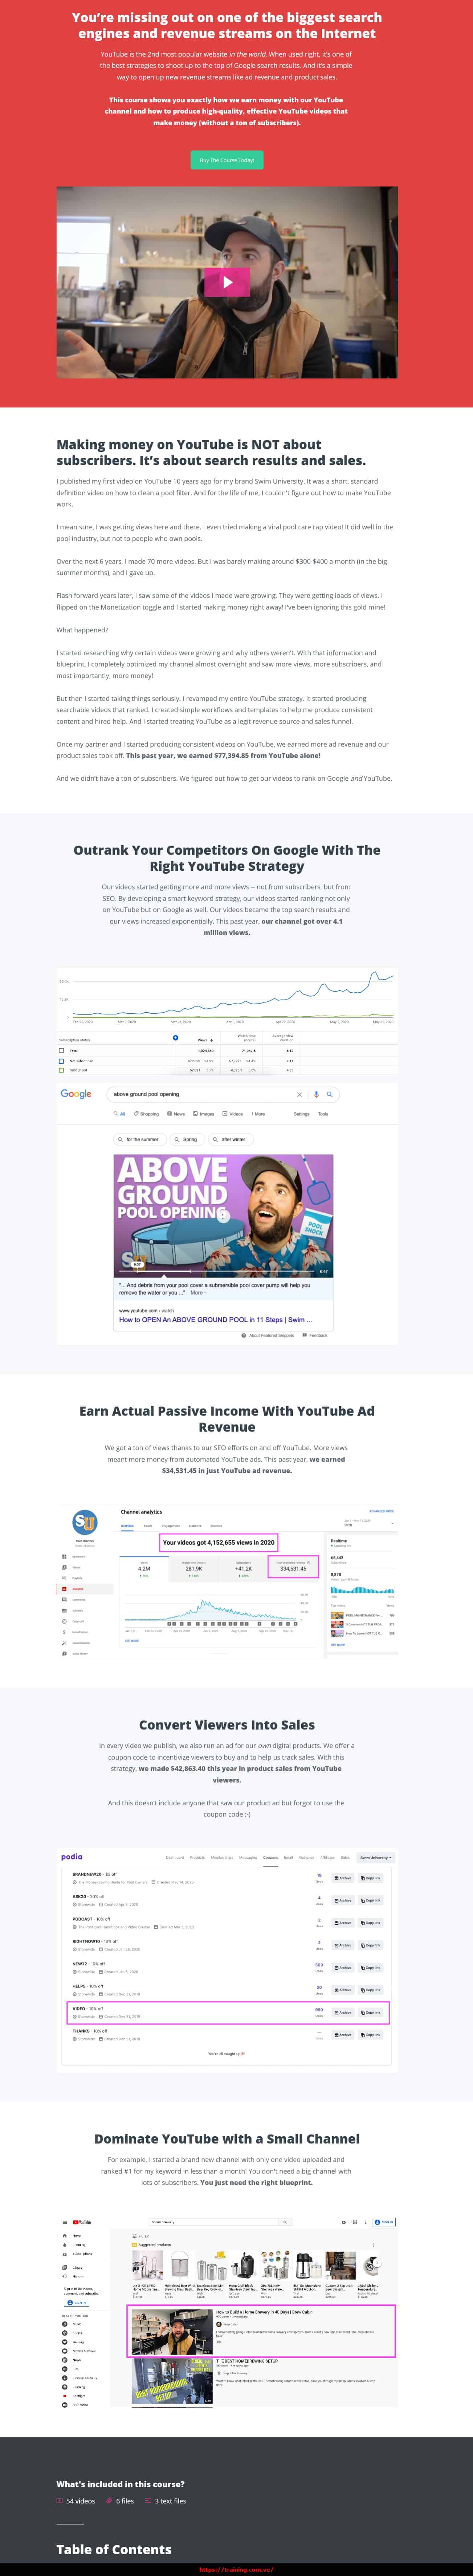 YouTube for Bloggers by Matt Giovanisci Sales Page